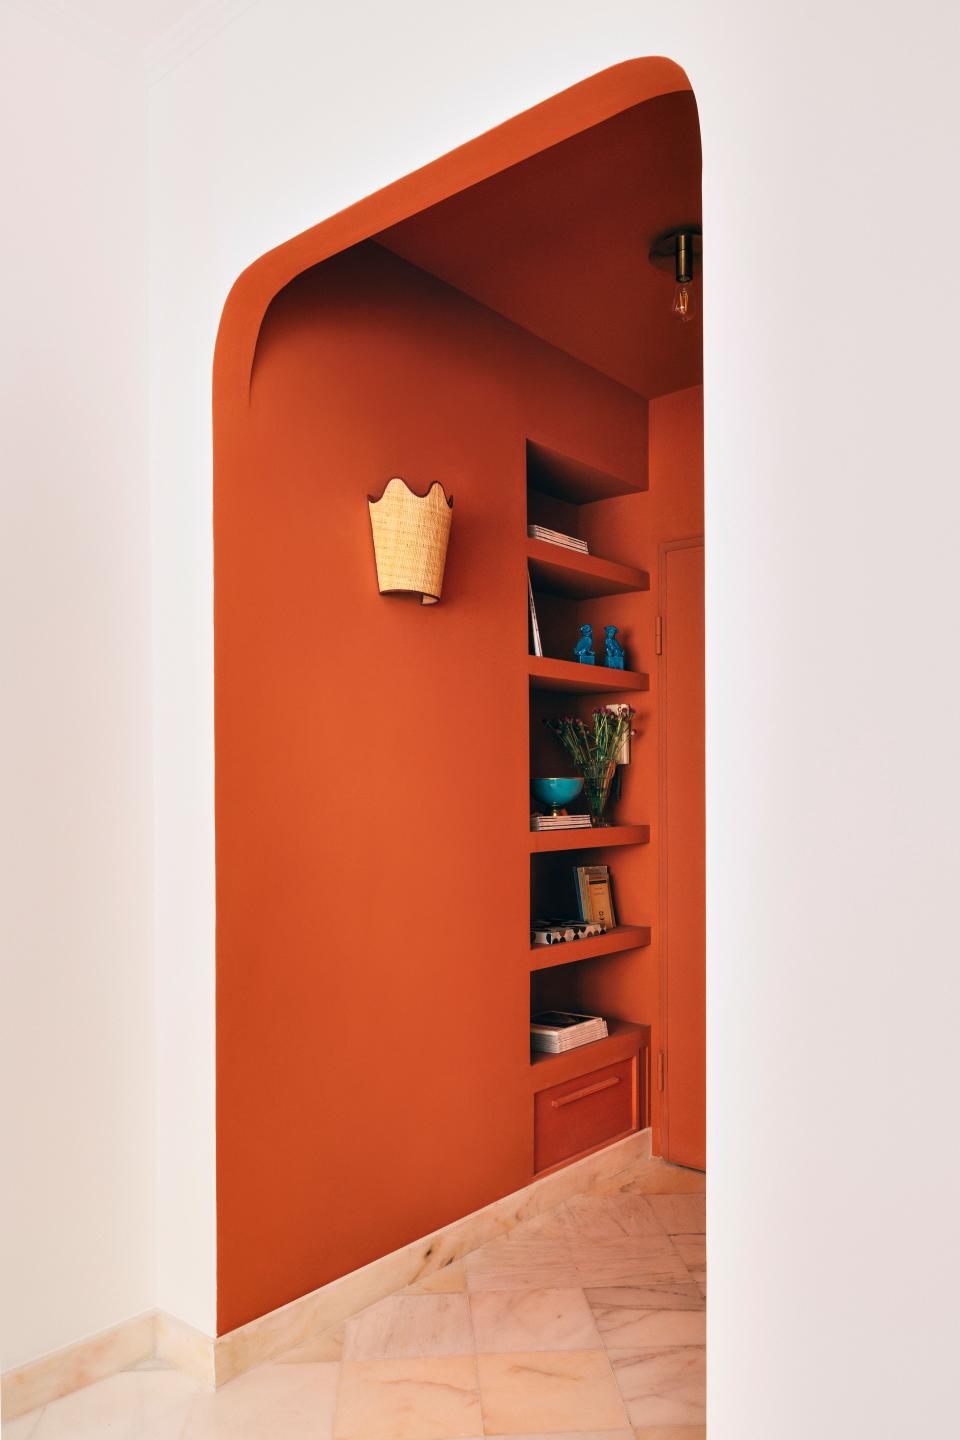 Mirta softened the entrance with arches and enveloped it in a warm coral. In a bid to optimize every square inch, she carved out a bookshelf on one wall and a full-height storage cabinet with three flush doors on the other. The ceiling lights are from H&M’s Markslöjd range, while the wavy-edged wall sconces, woven from raffia and Bordeaux grosgrain, are of Mirta’s own design.